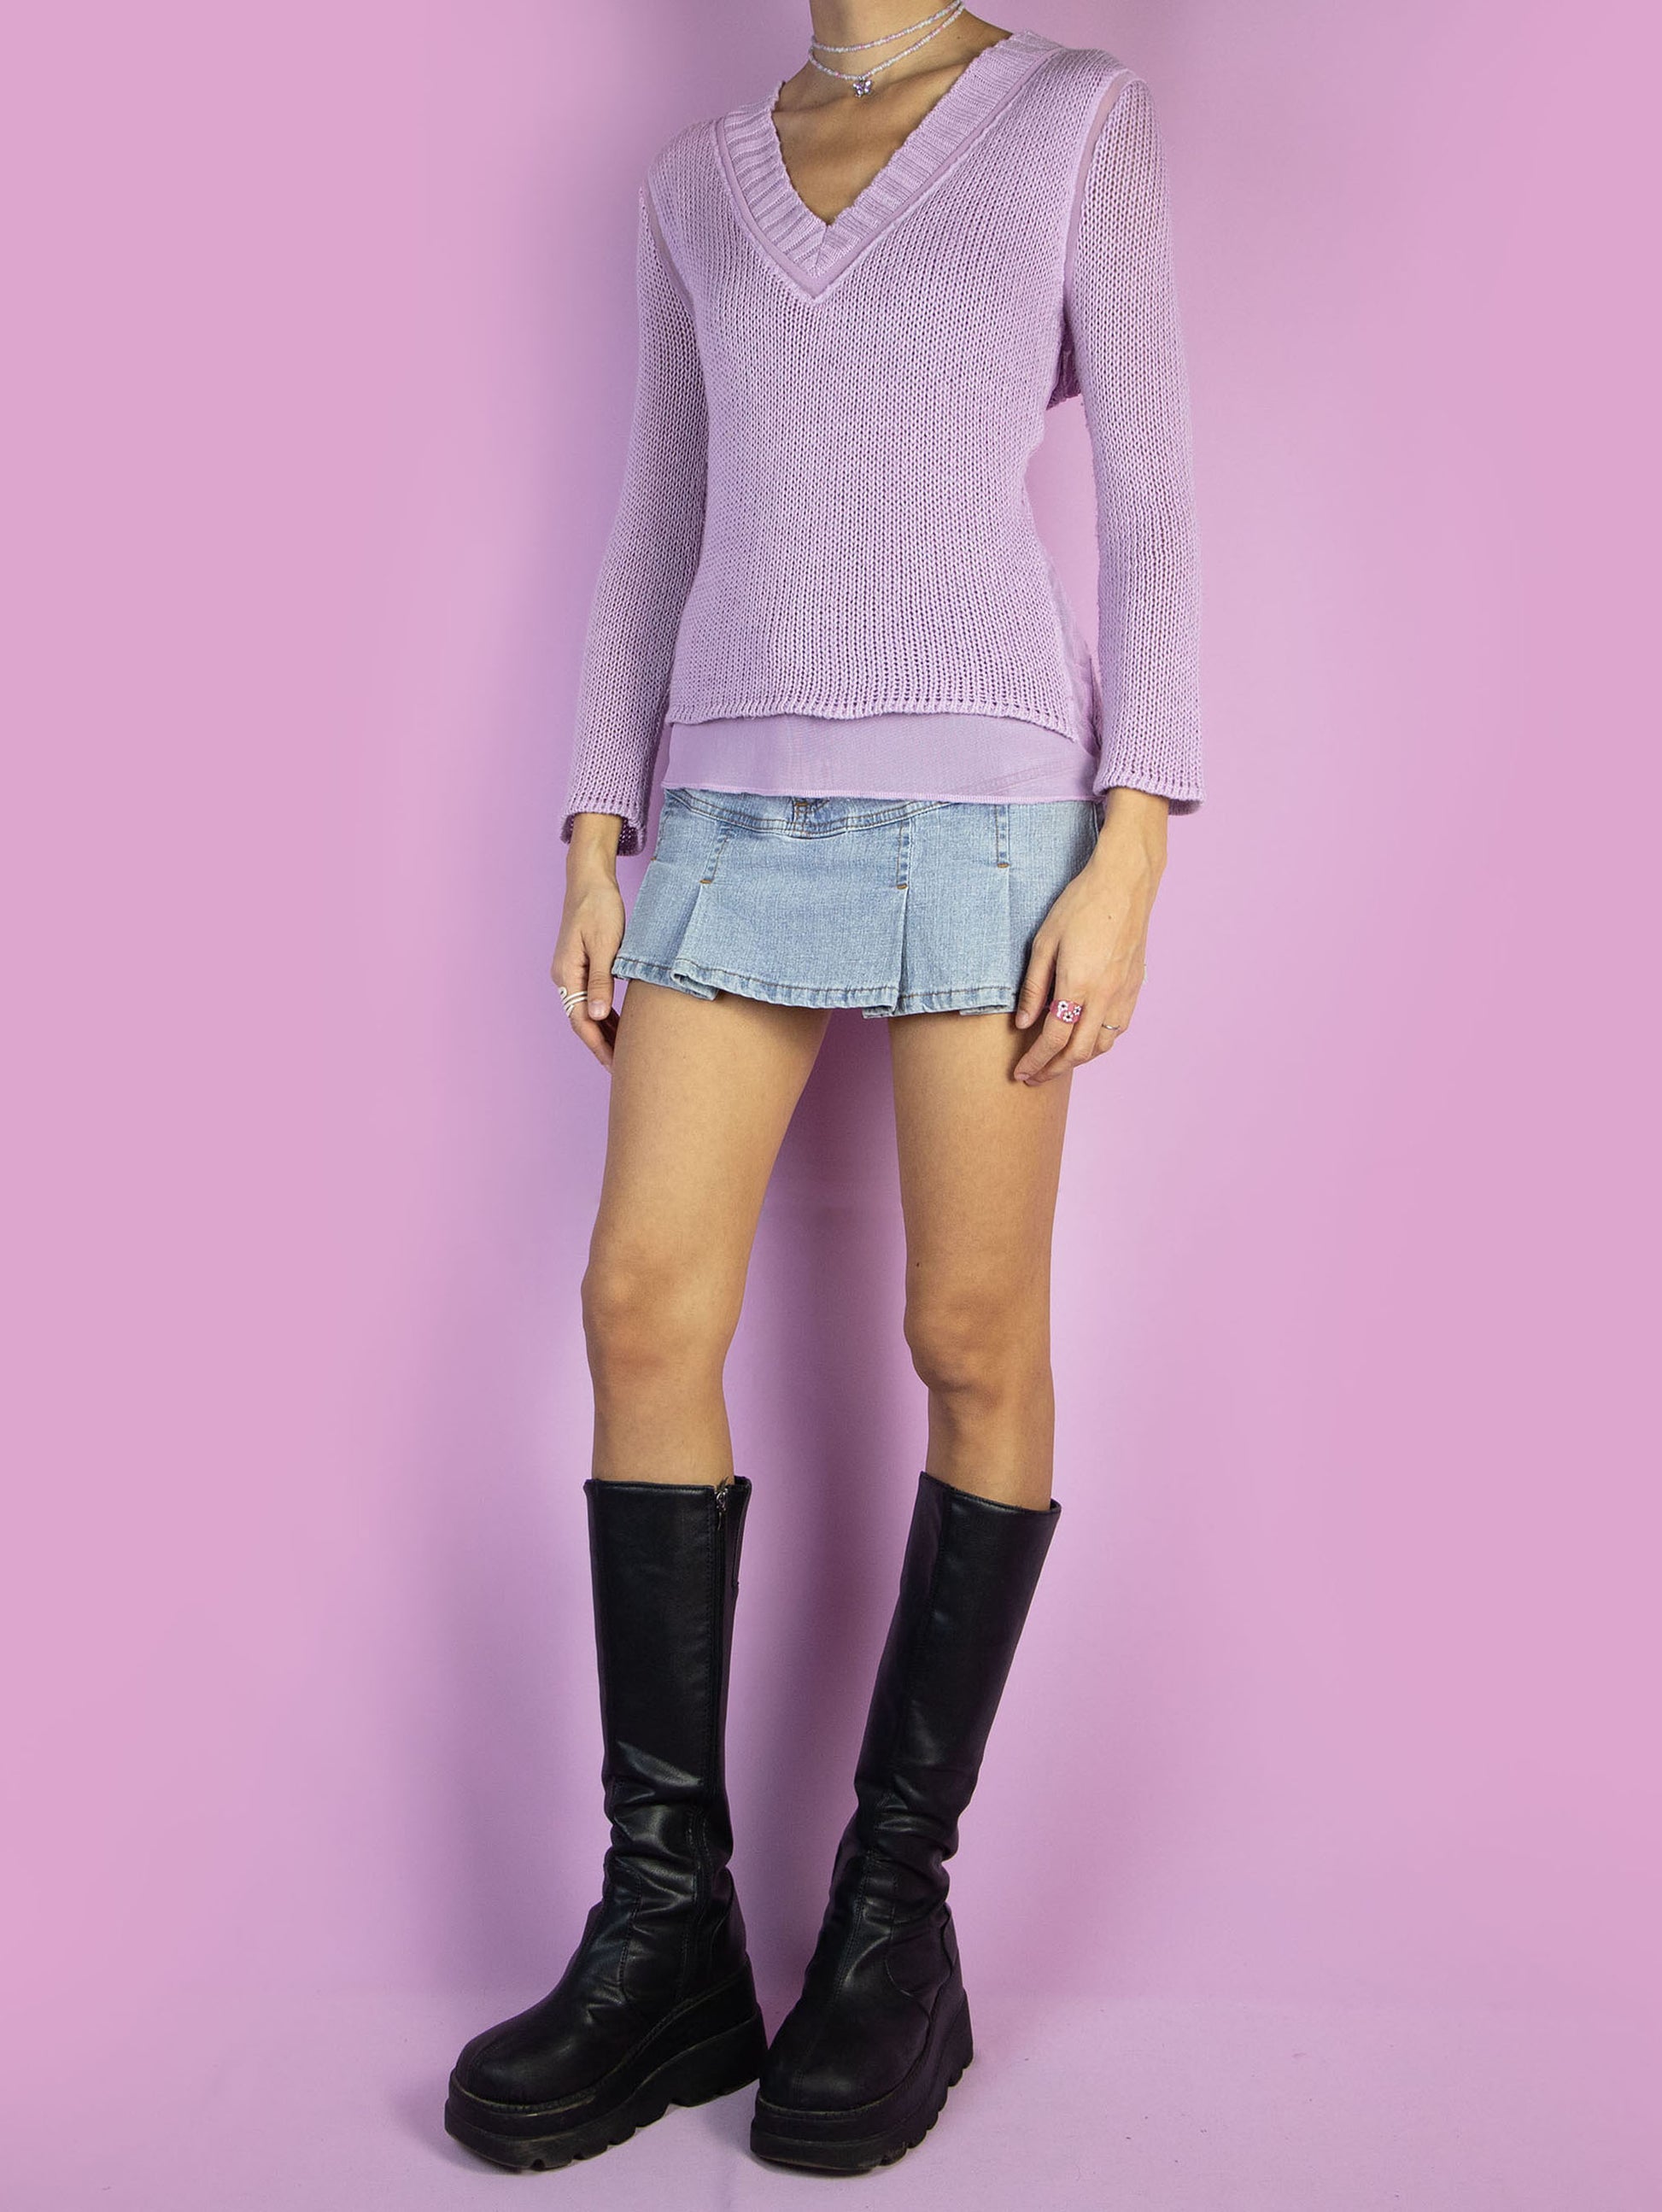 The Y2K Pastel Purple Knit Sweater is a vintage light pinkish-purple sweater with a V-neck and mesh details. Cyber fairy grunge 2000s knit jumper.